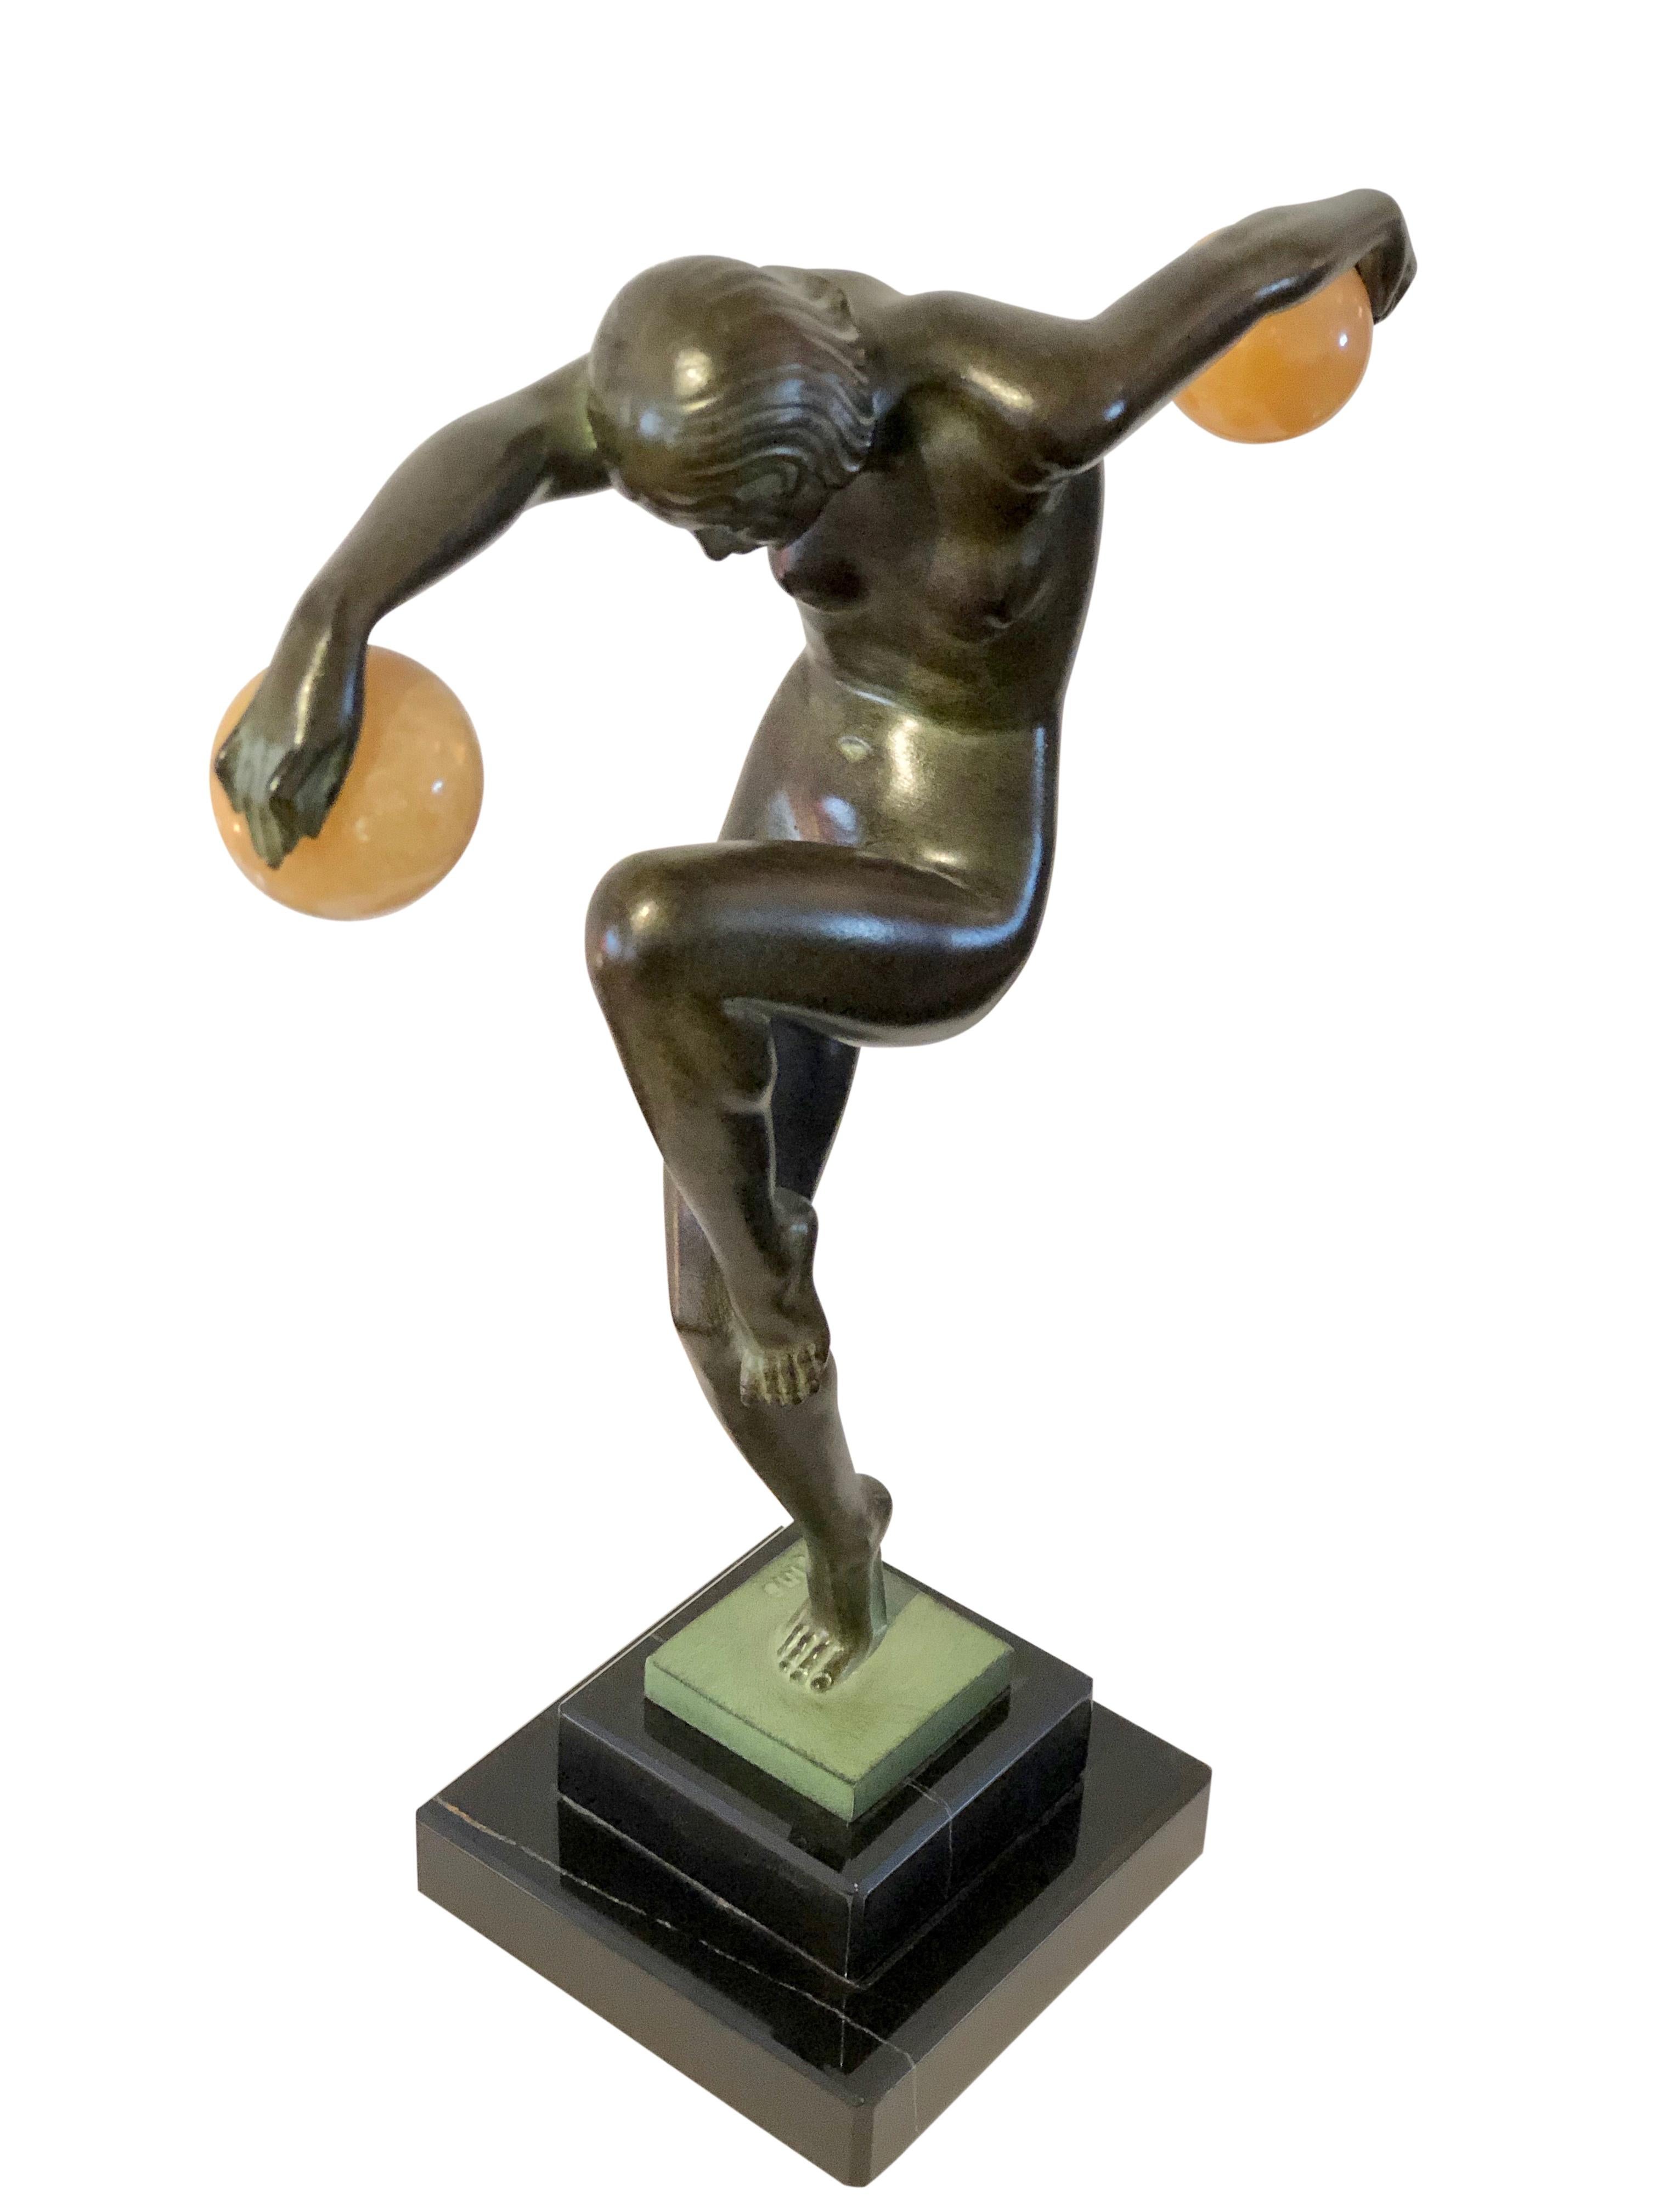 Art Deco Danseuse Aux Boules French Sculpture in Spelters by Denis from Max Le Verrier